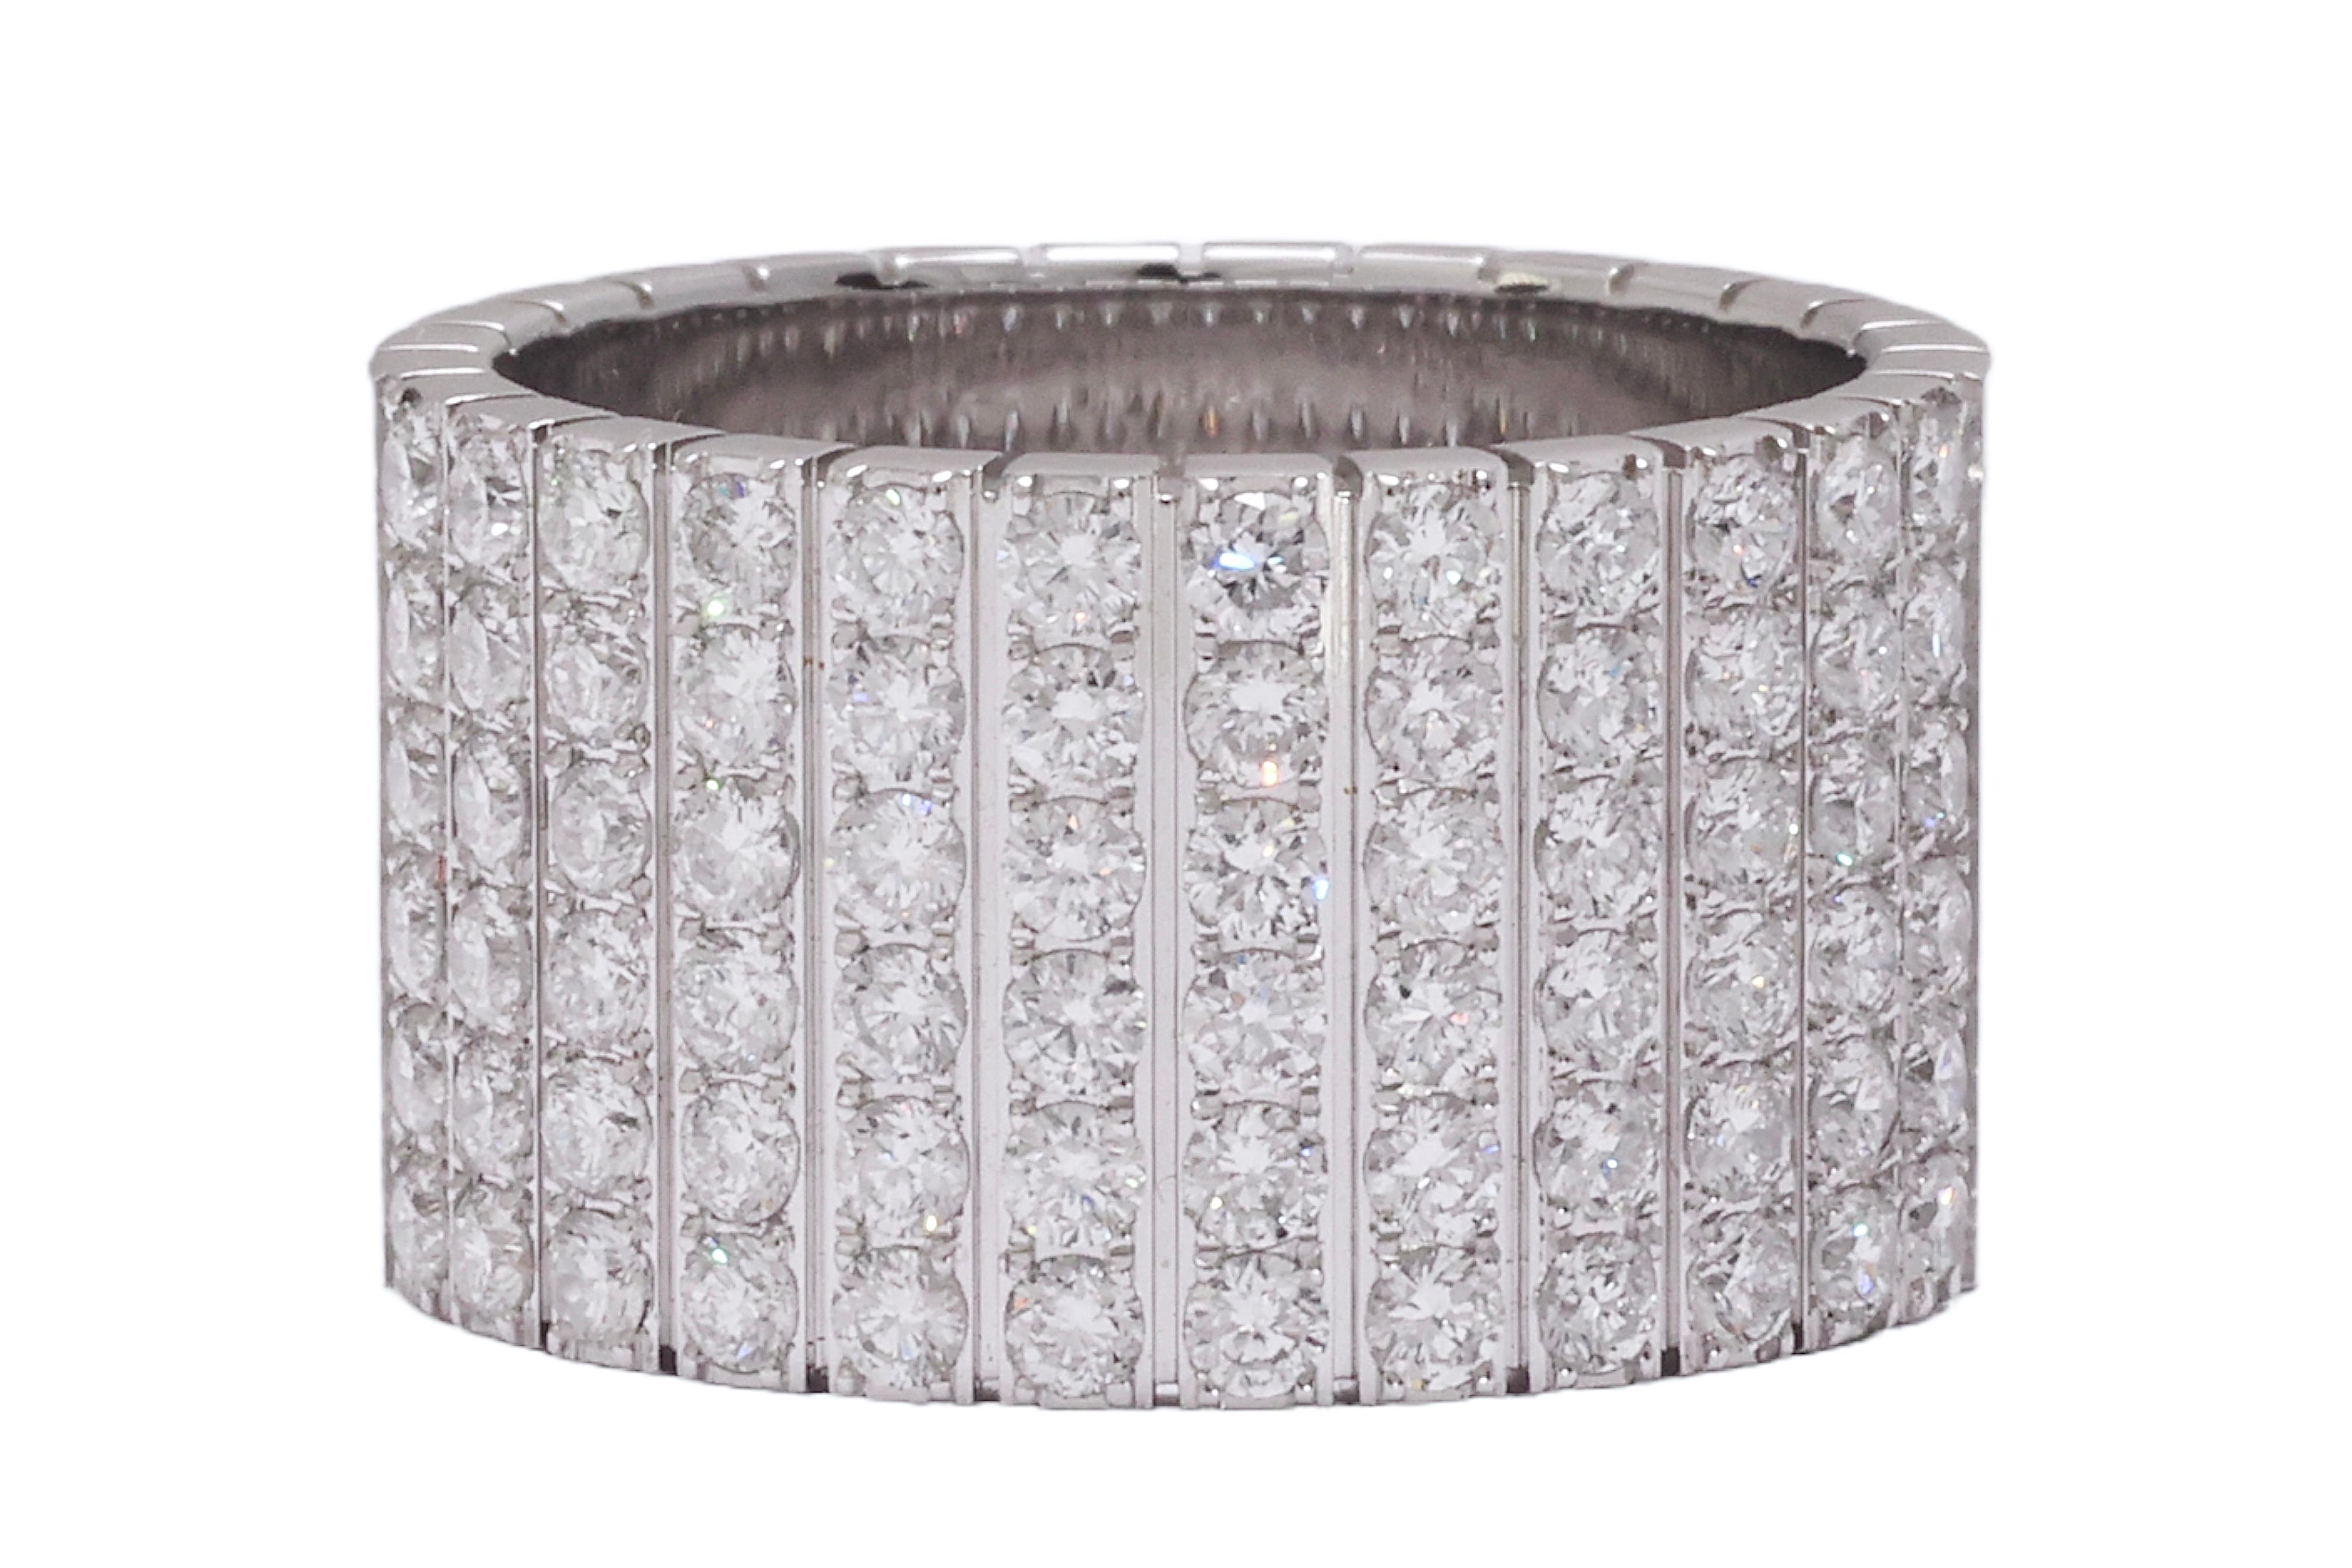 Gorgeous 18 kt. White Gold Ring With 2.16 Ct. Diamonds

Diamonds: Brilliant cut diamonds, together 2.16 ct.

Material: 18 kt. white gold

Ring size: 54.4 / 7 US ( can be resized for free)

Total weight: 14.6 grams / 9.4 dwt / 0.515 oz